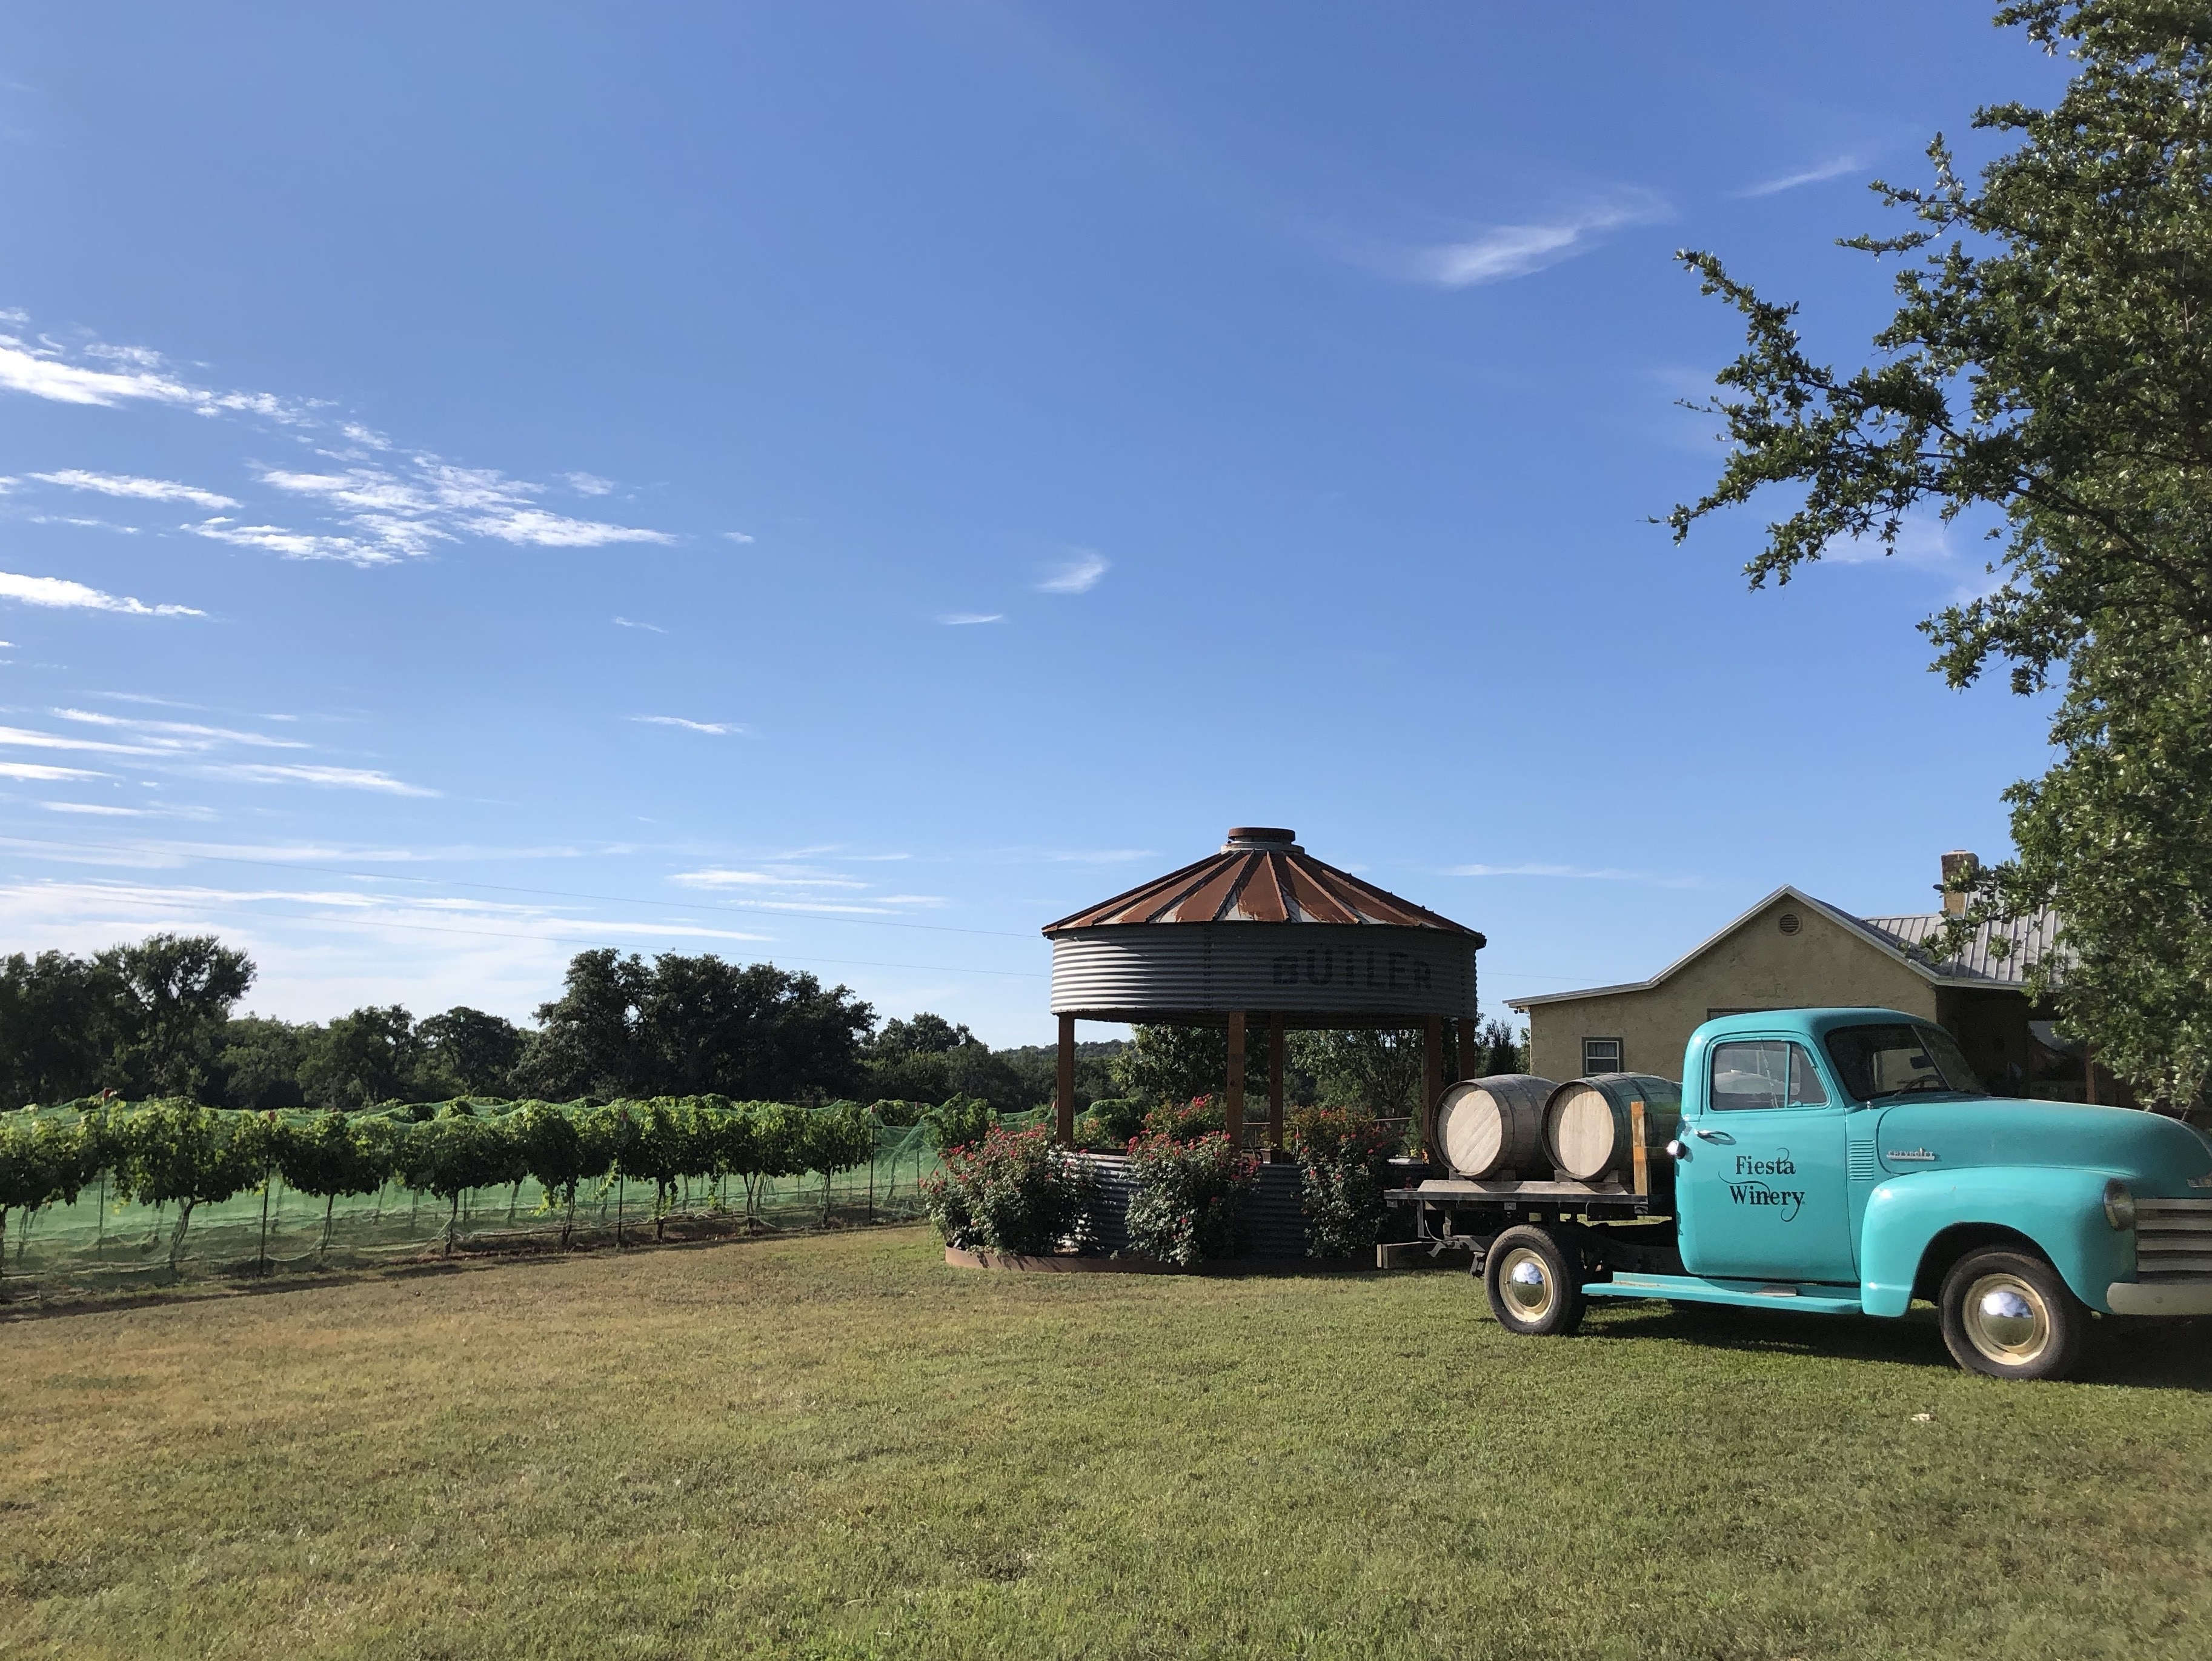 A destination winery in the drive to Colorado Bend State Park. Serves up assorted Fiesta wines and wood-fired pizzas.  Very little cell service, if any, makes it possible to unplug and enjoy the sites.